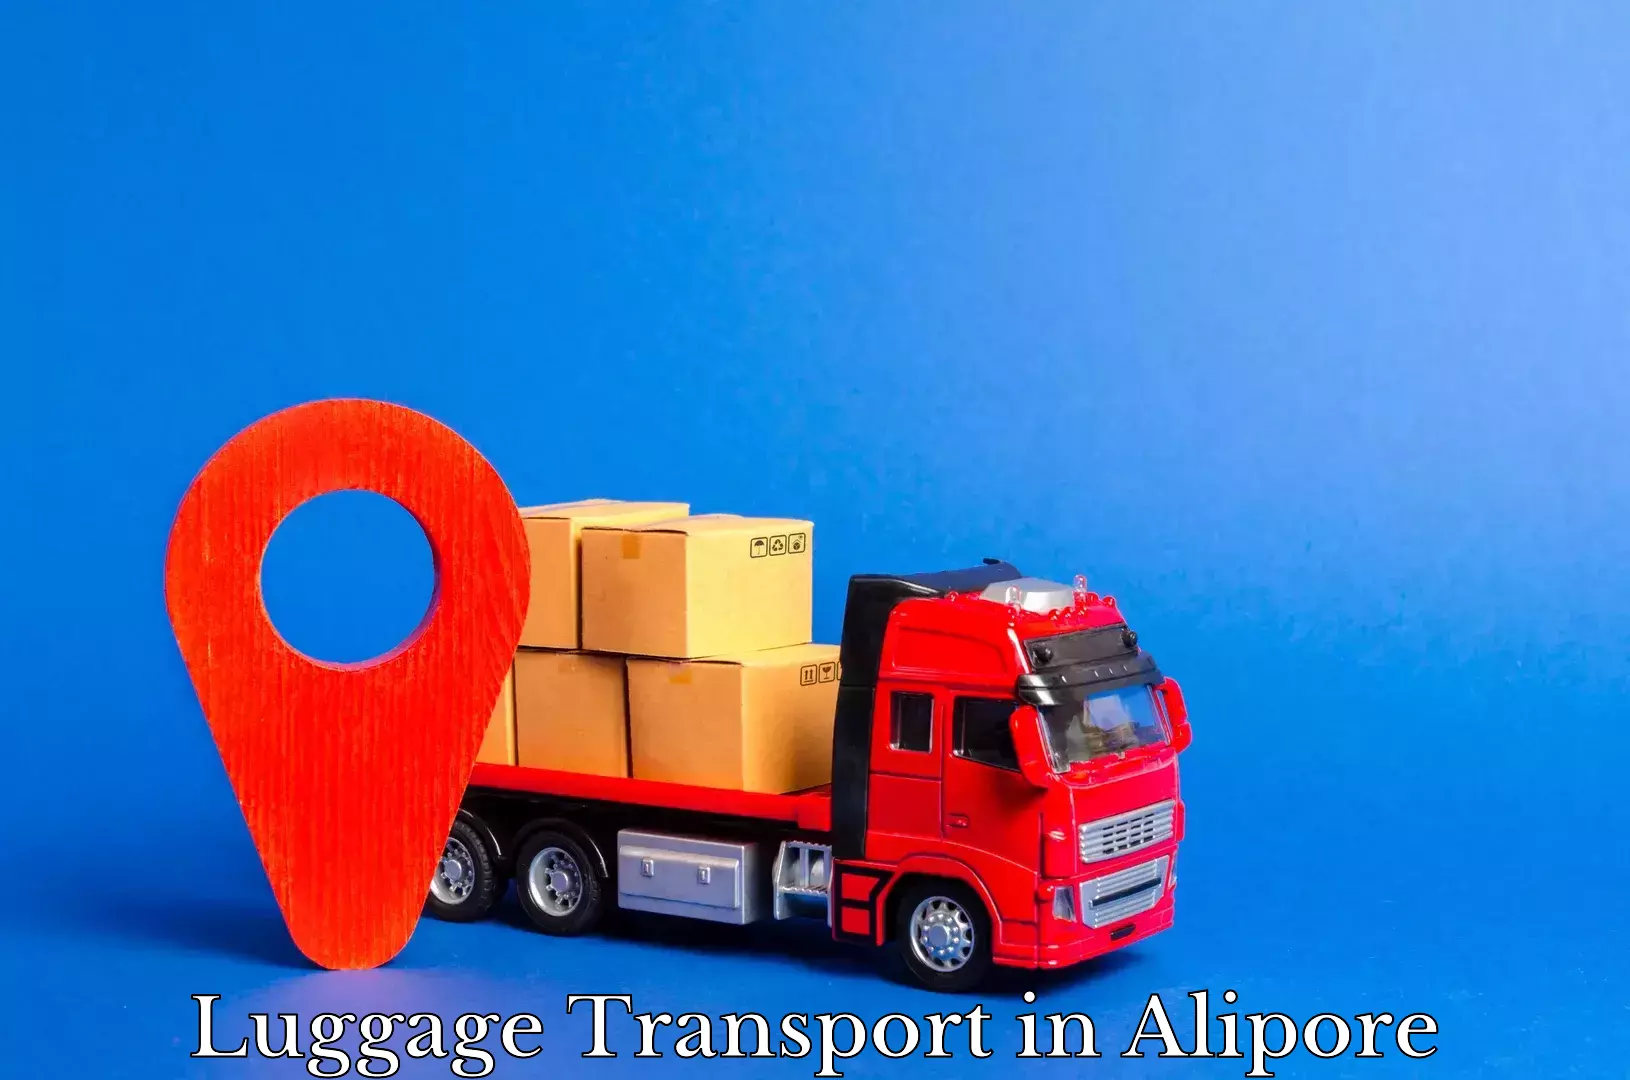 Express luggage delivery in Alipore